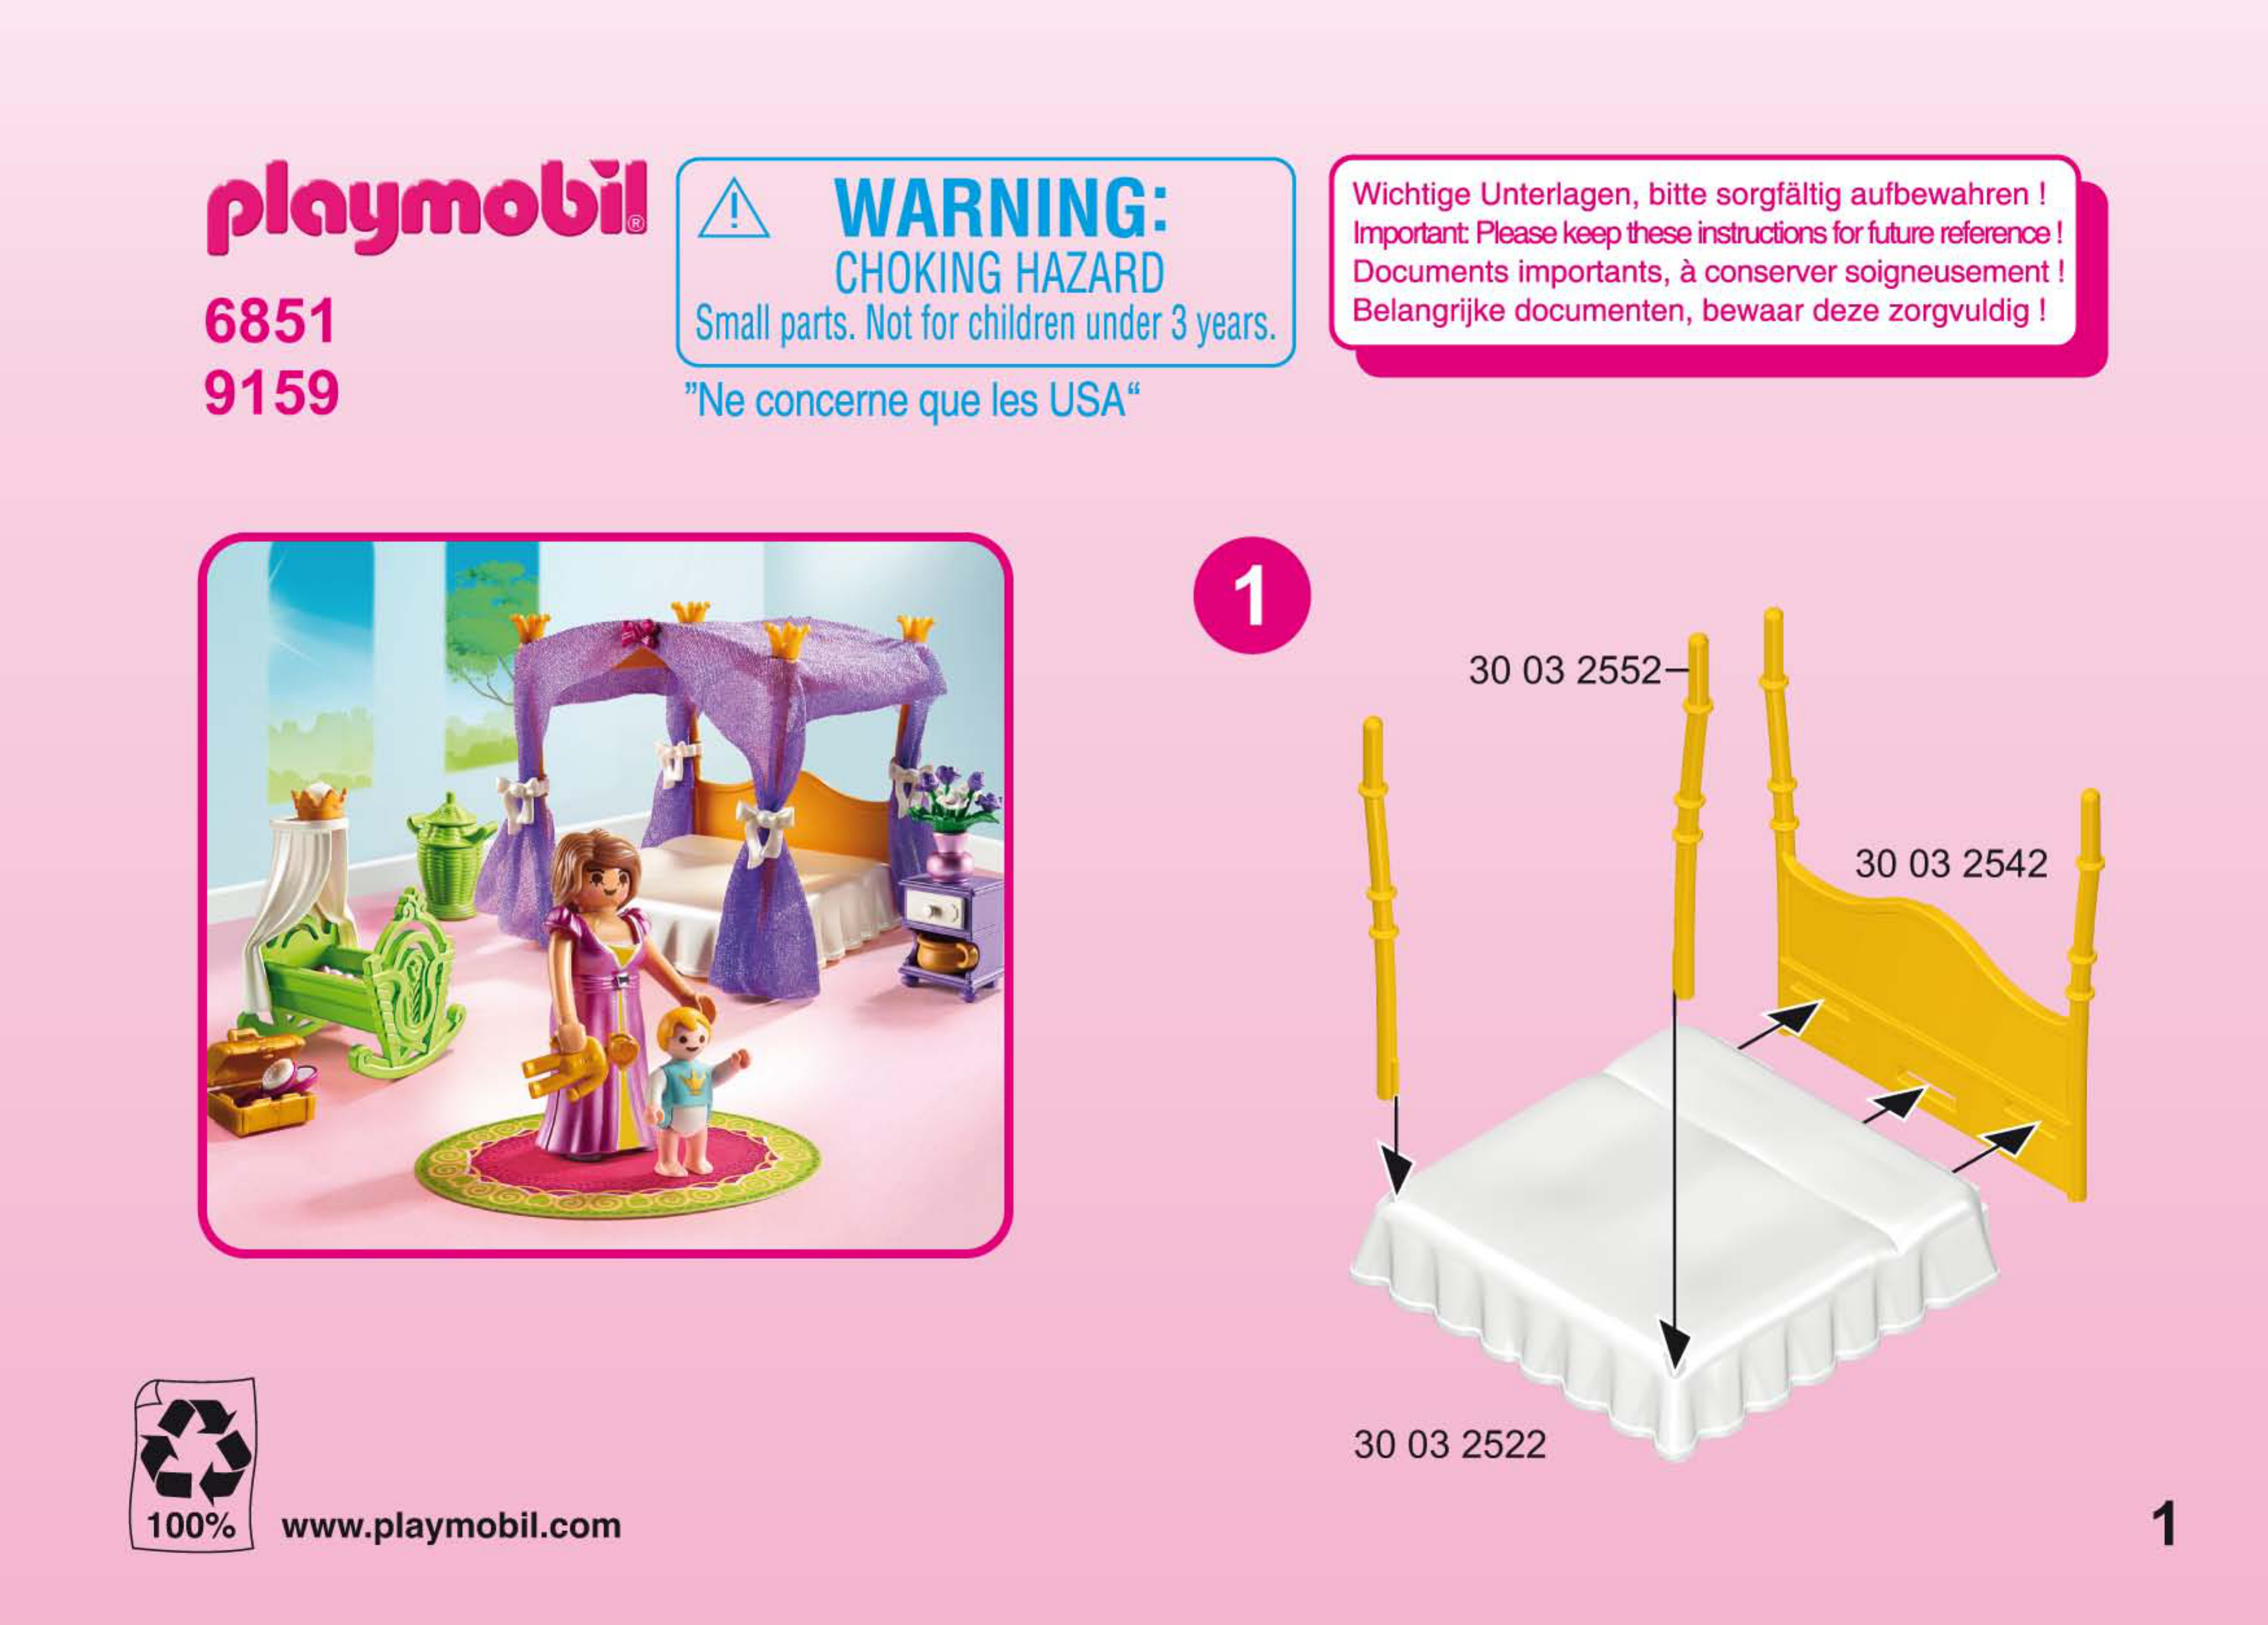 Manual Playmobil (page 1 of 4) (All languages)